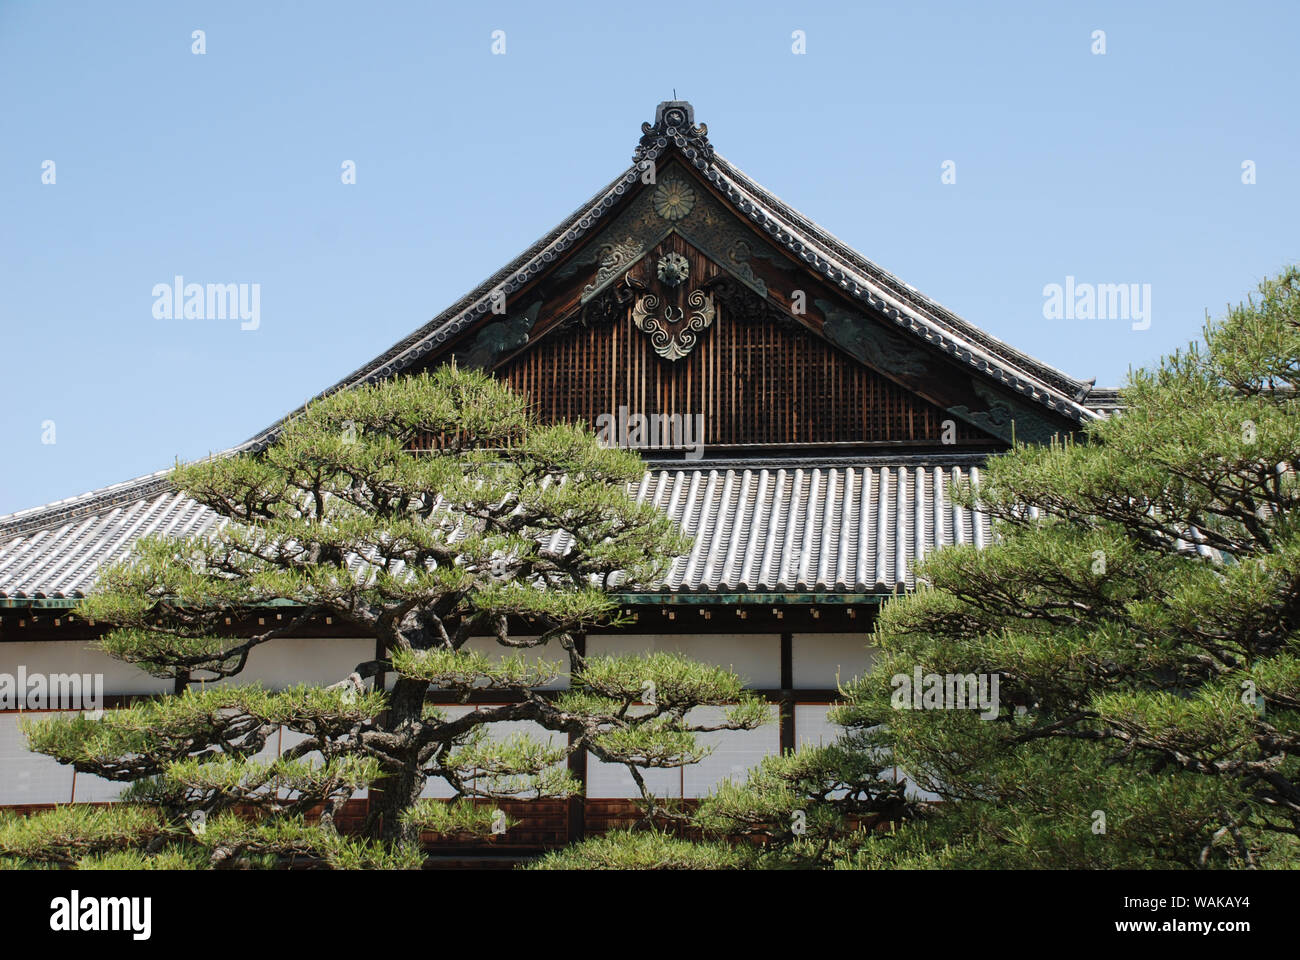 The UNESCO World Heritage Site listed Nijo Castle in Kyoto, Japan Stock Photo